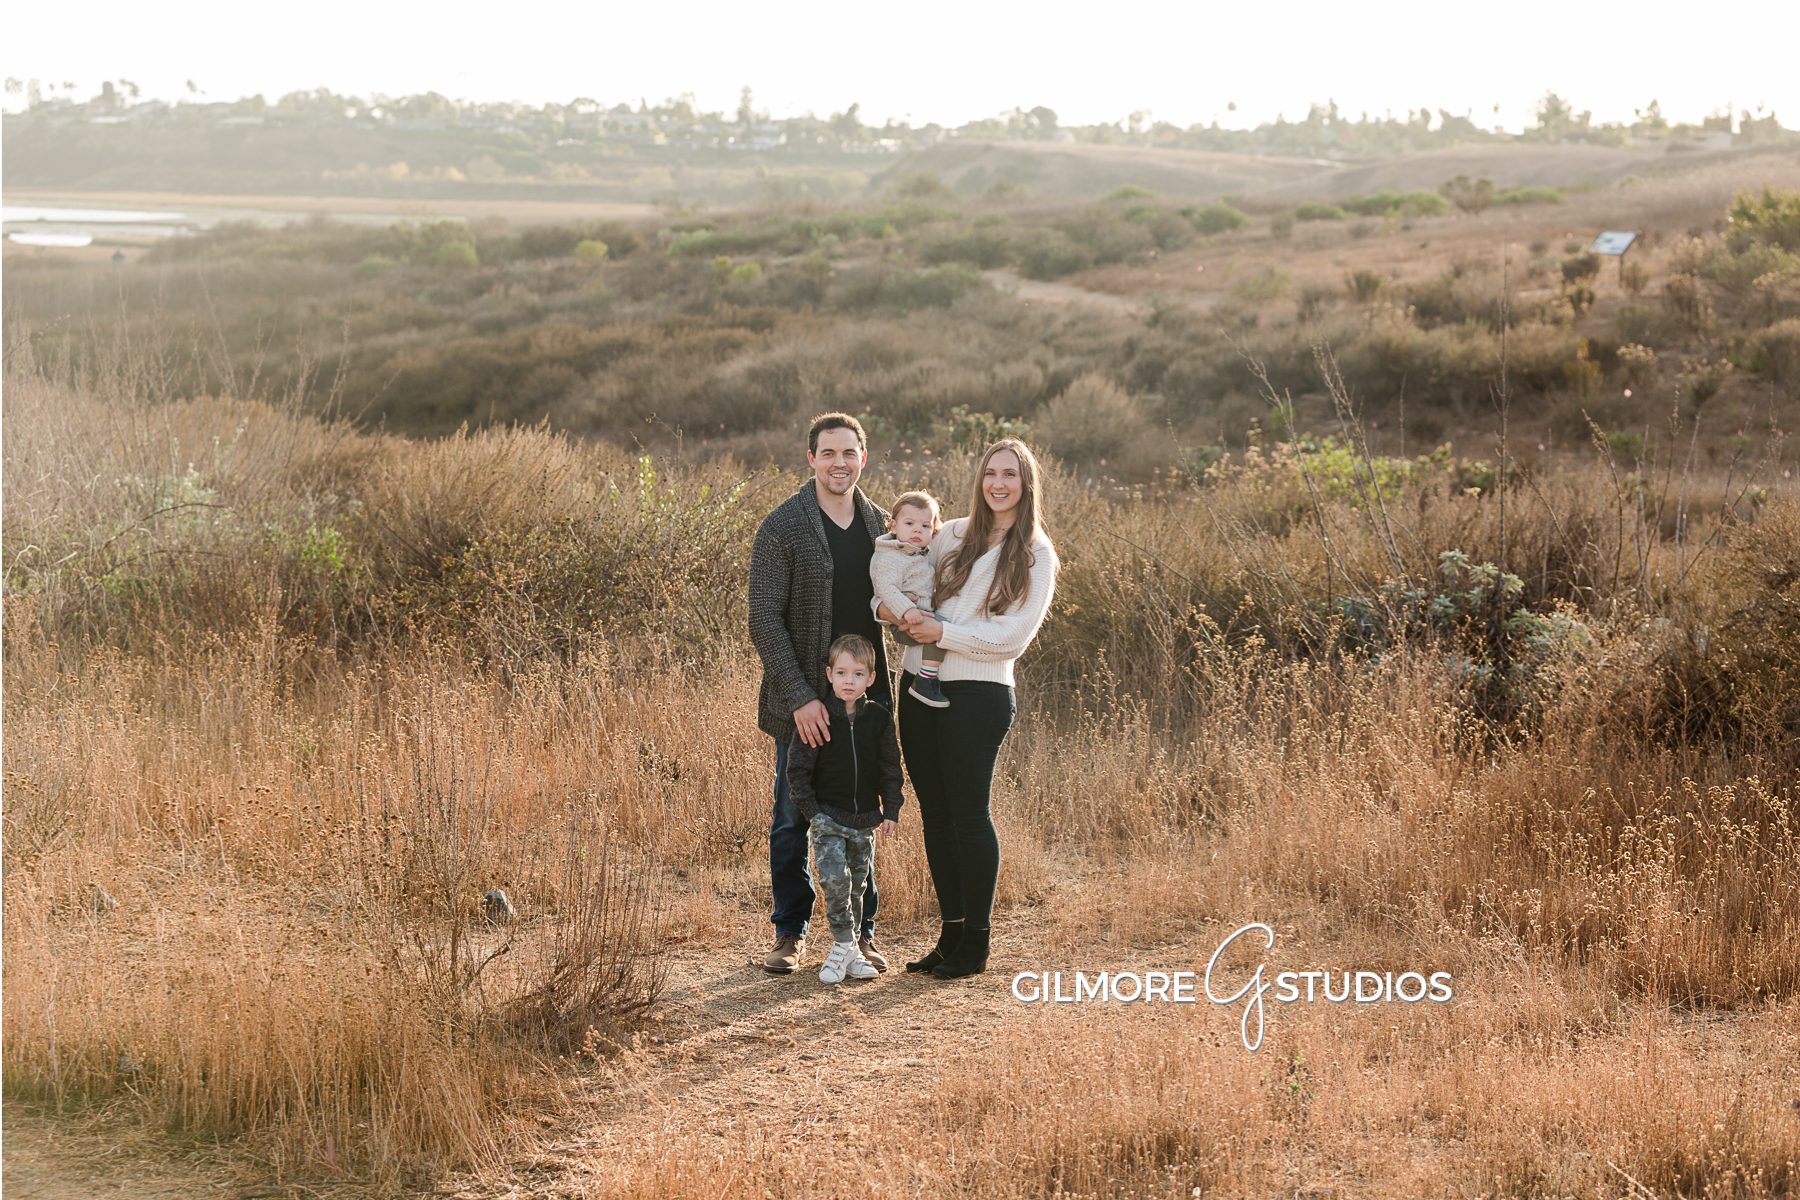 Family Mini Sessions in Newport Beach, Back Bay portrait photographer, children, families, outdoor locations, winter, fall, orange county, ca